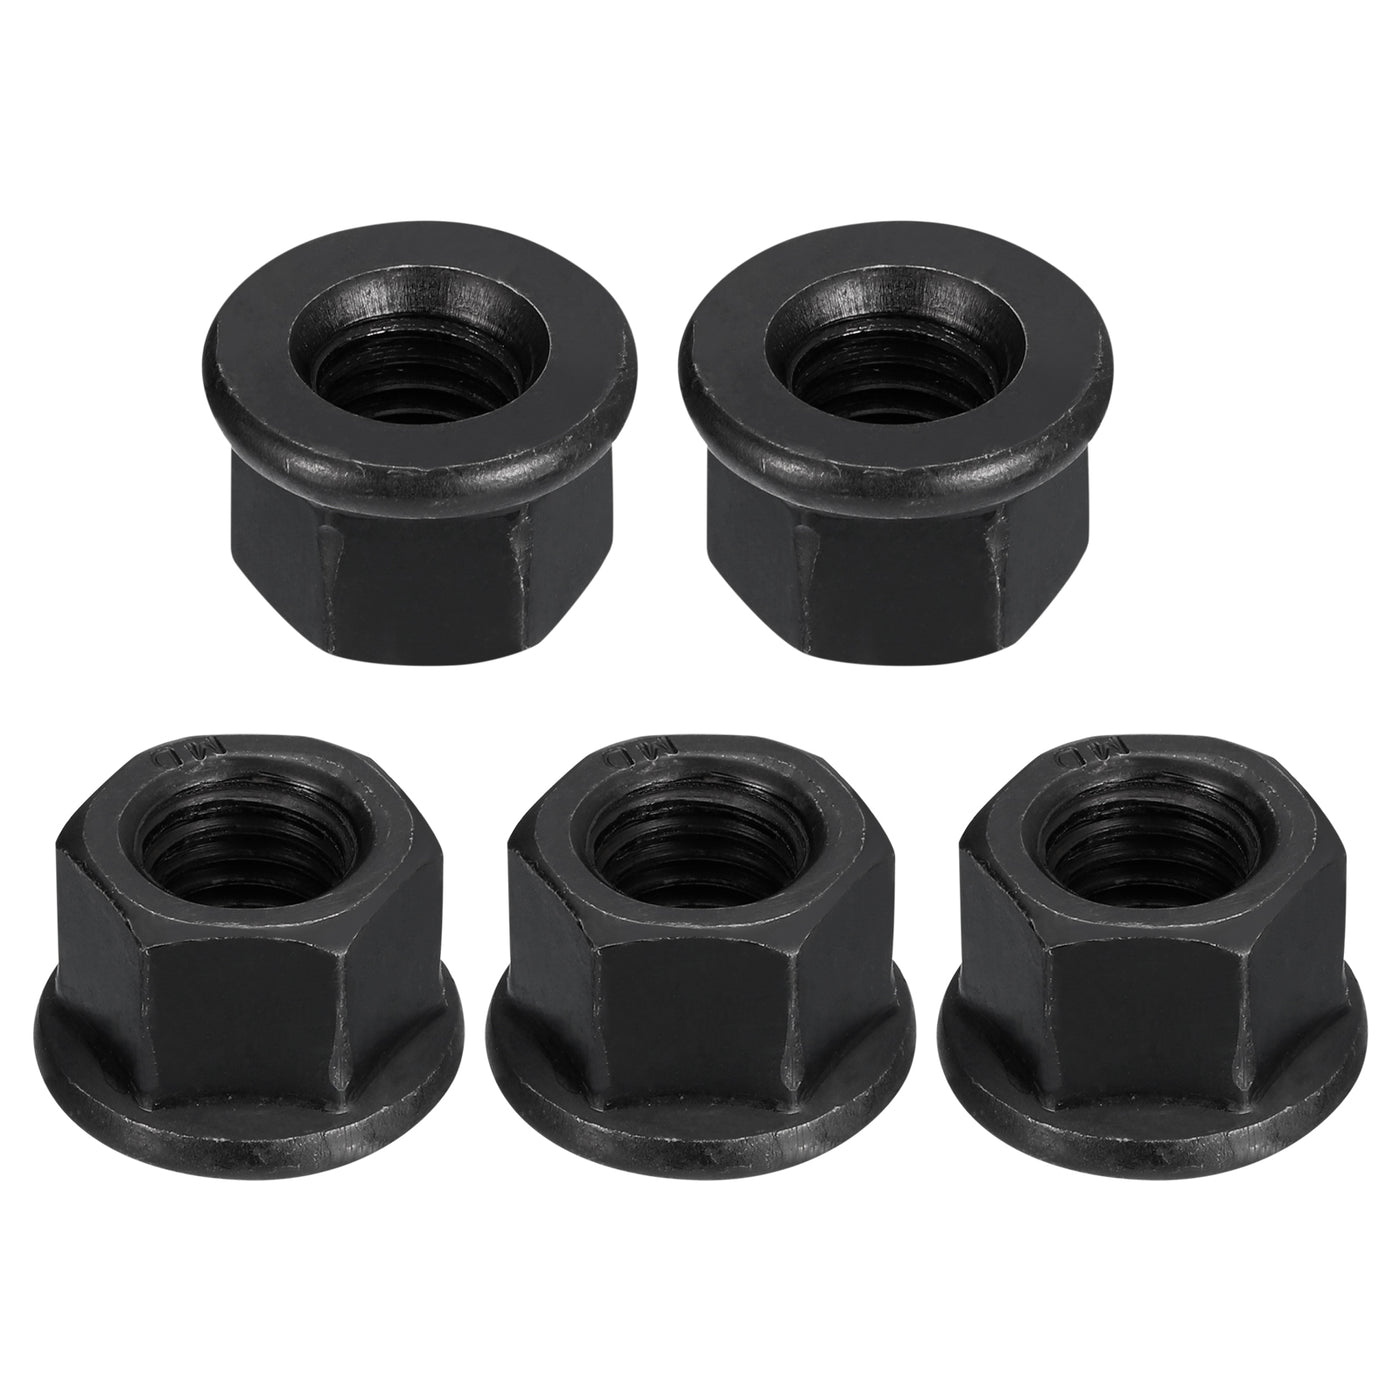 uxcell Uxcell M14 Flange Hex Lock Nuts, 5pcs Grade 8.8 Carbon Steel Hex Flange Nuts